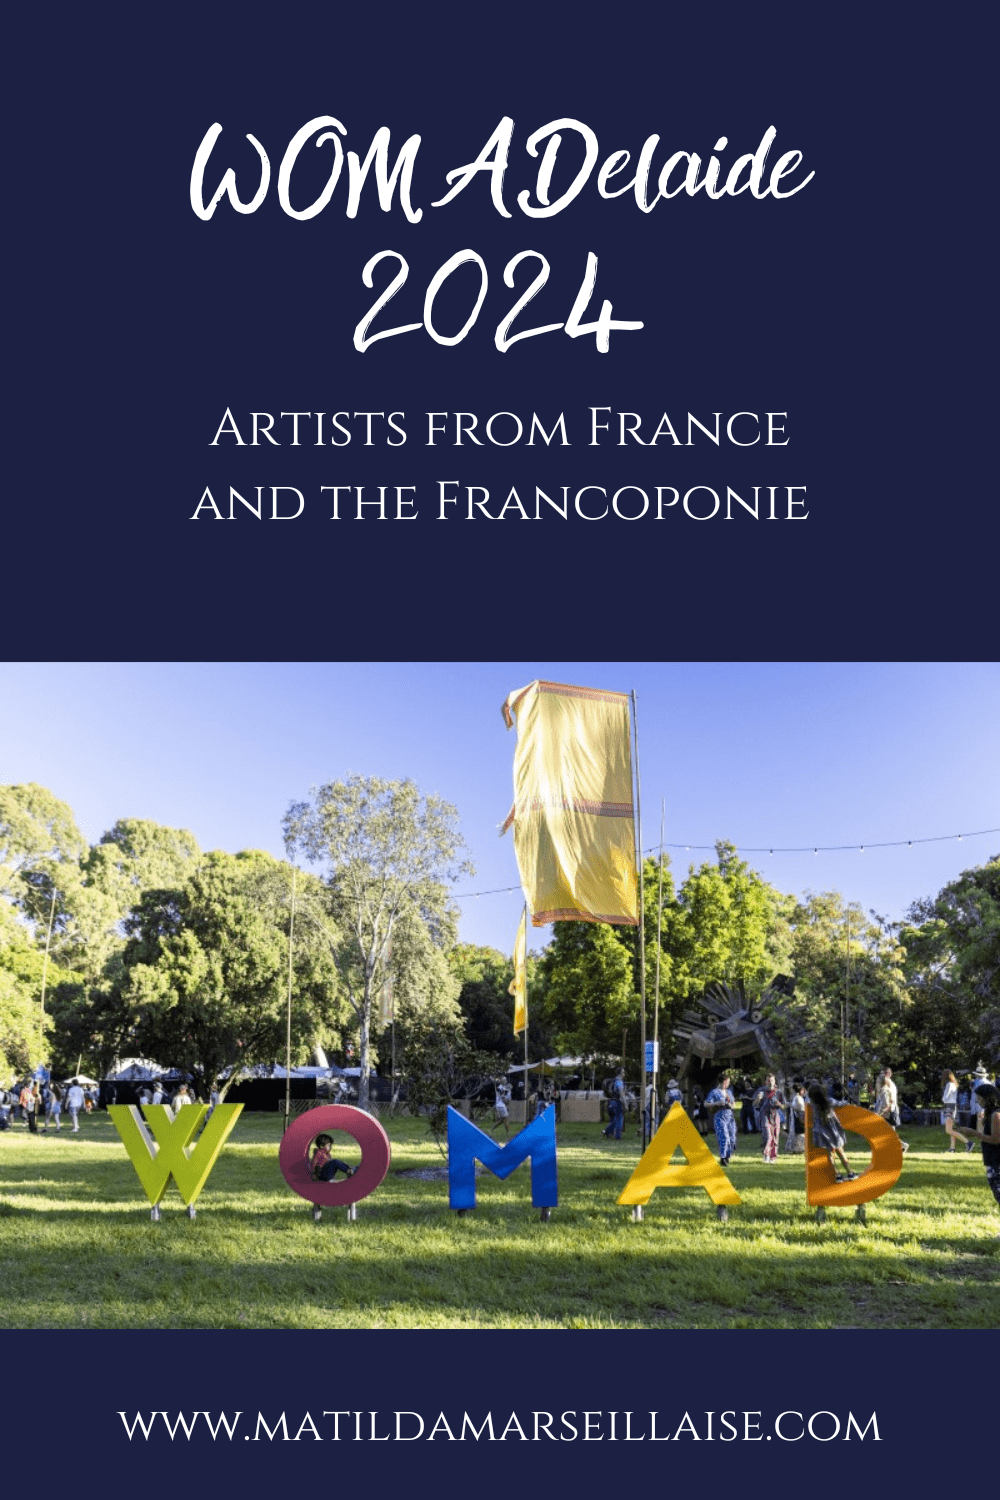 A look at the French and Francophone artists in the initial WOMADelaide 2024 line-up announcement